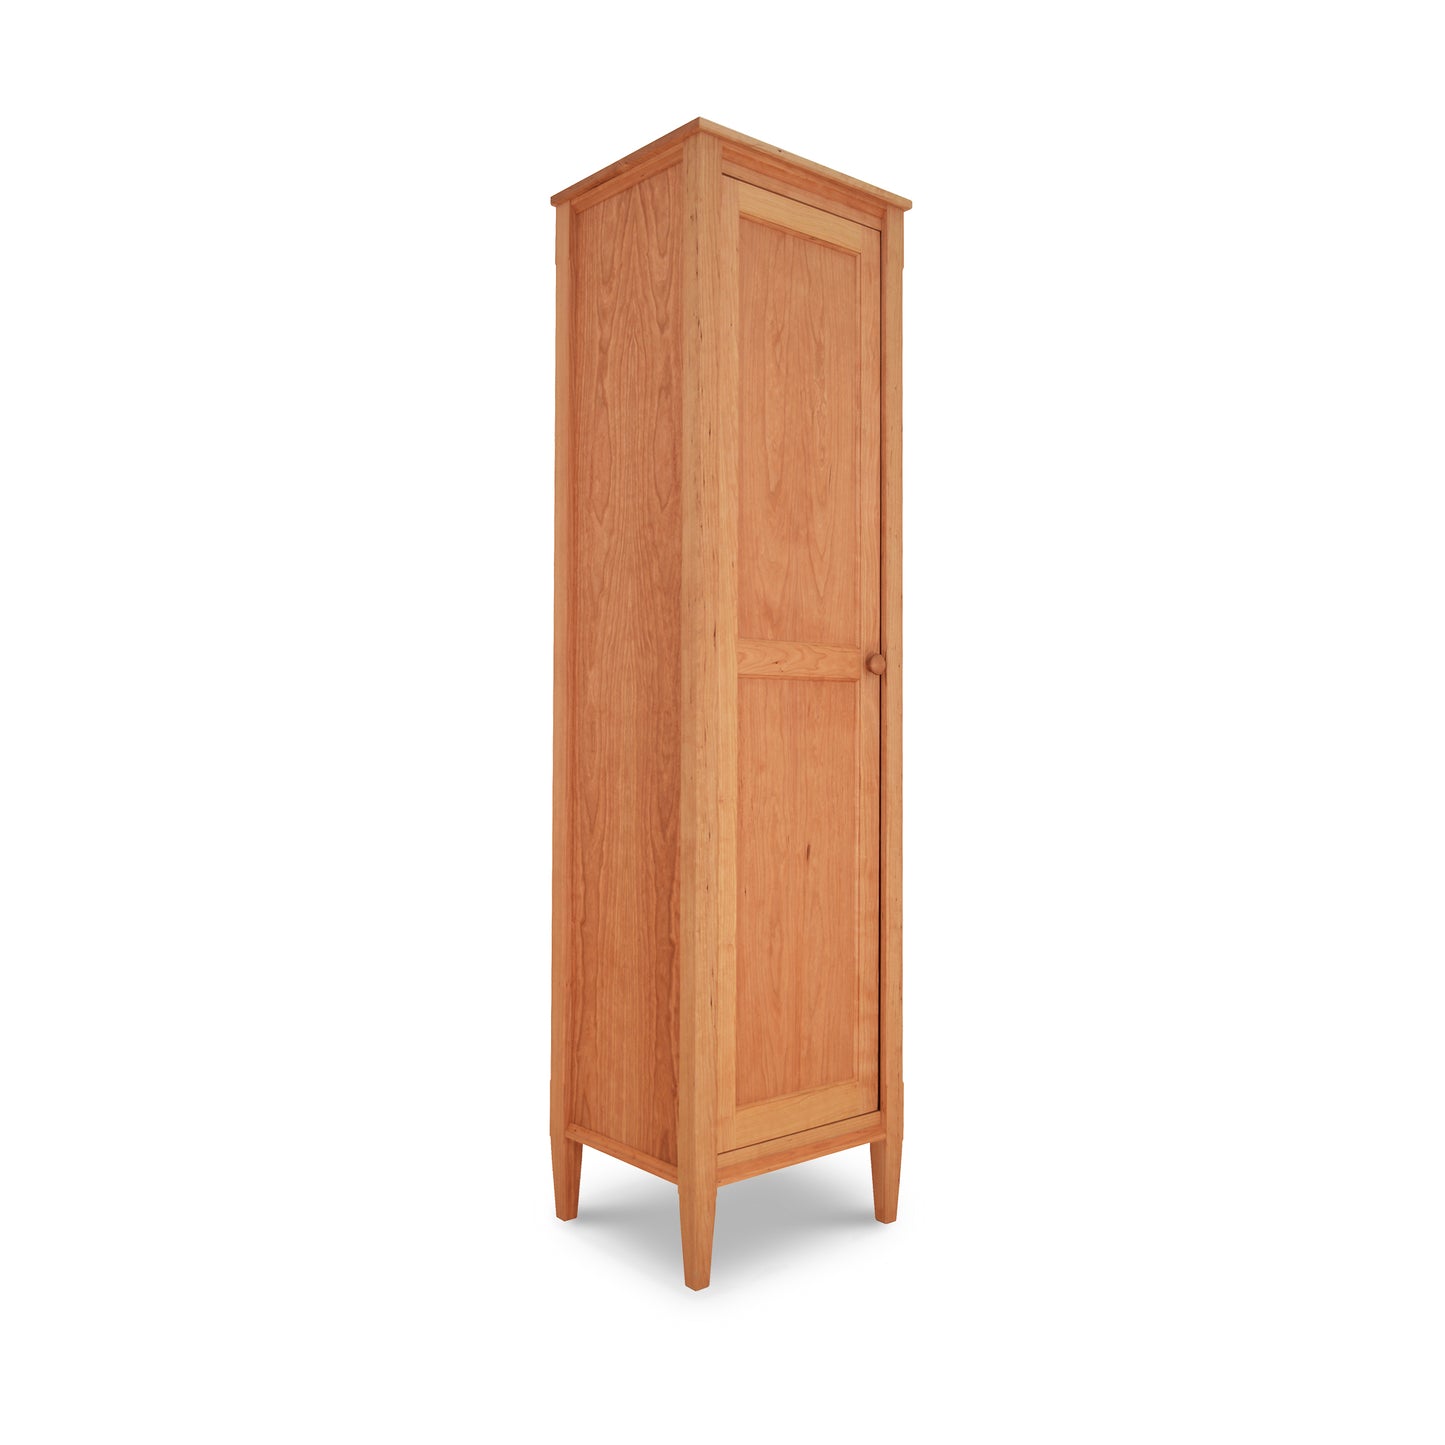 A Vermont Shaker Narrow Bookcase with Mirror, crafted from sustainably harvested woods by Maple Corner Woodworks, standing against a white background.